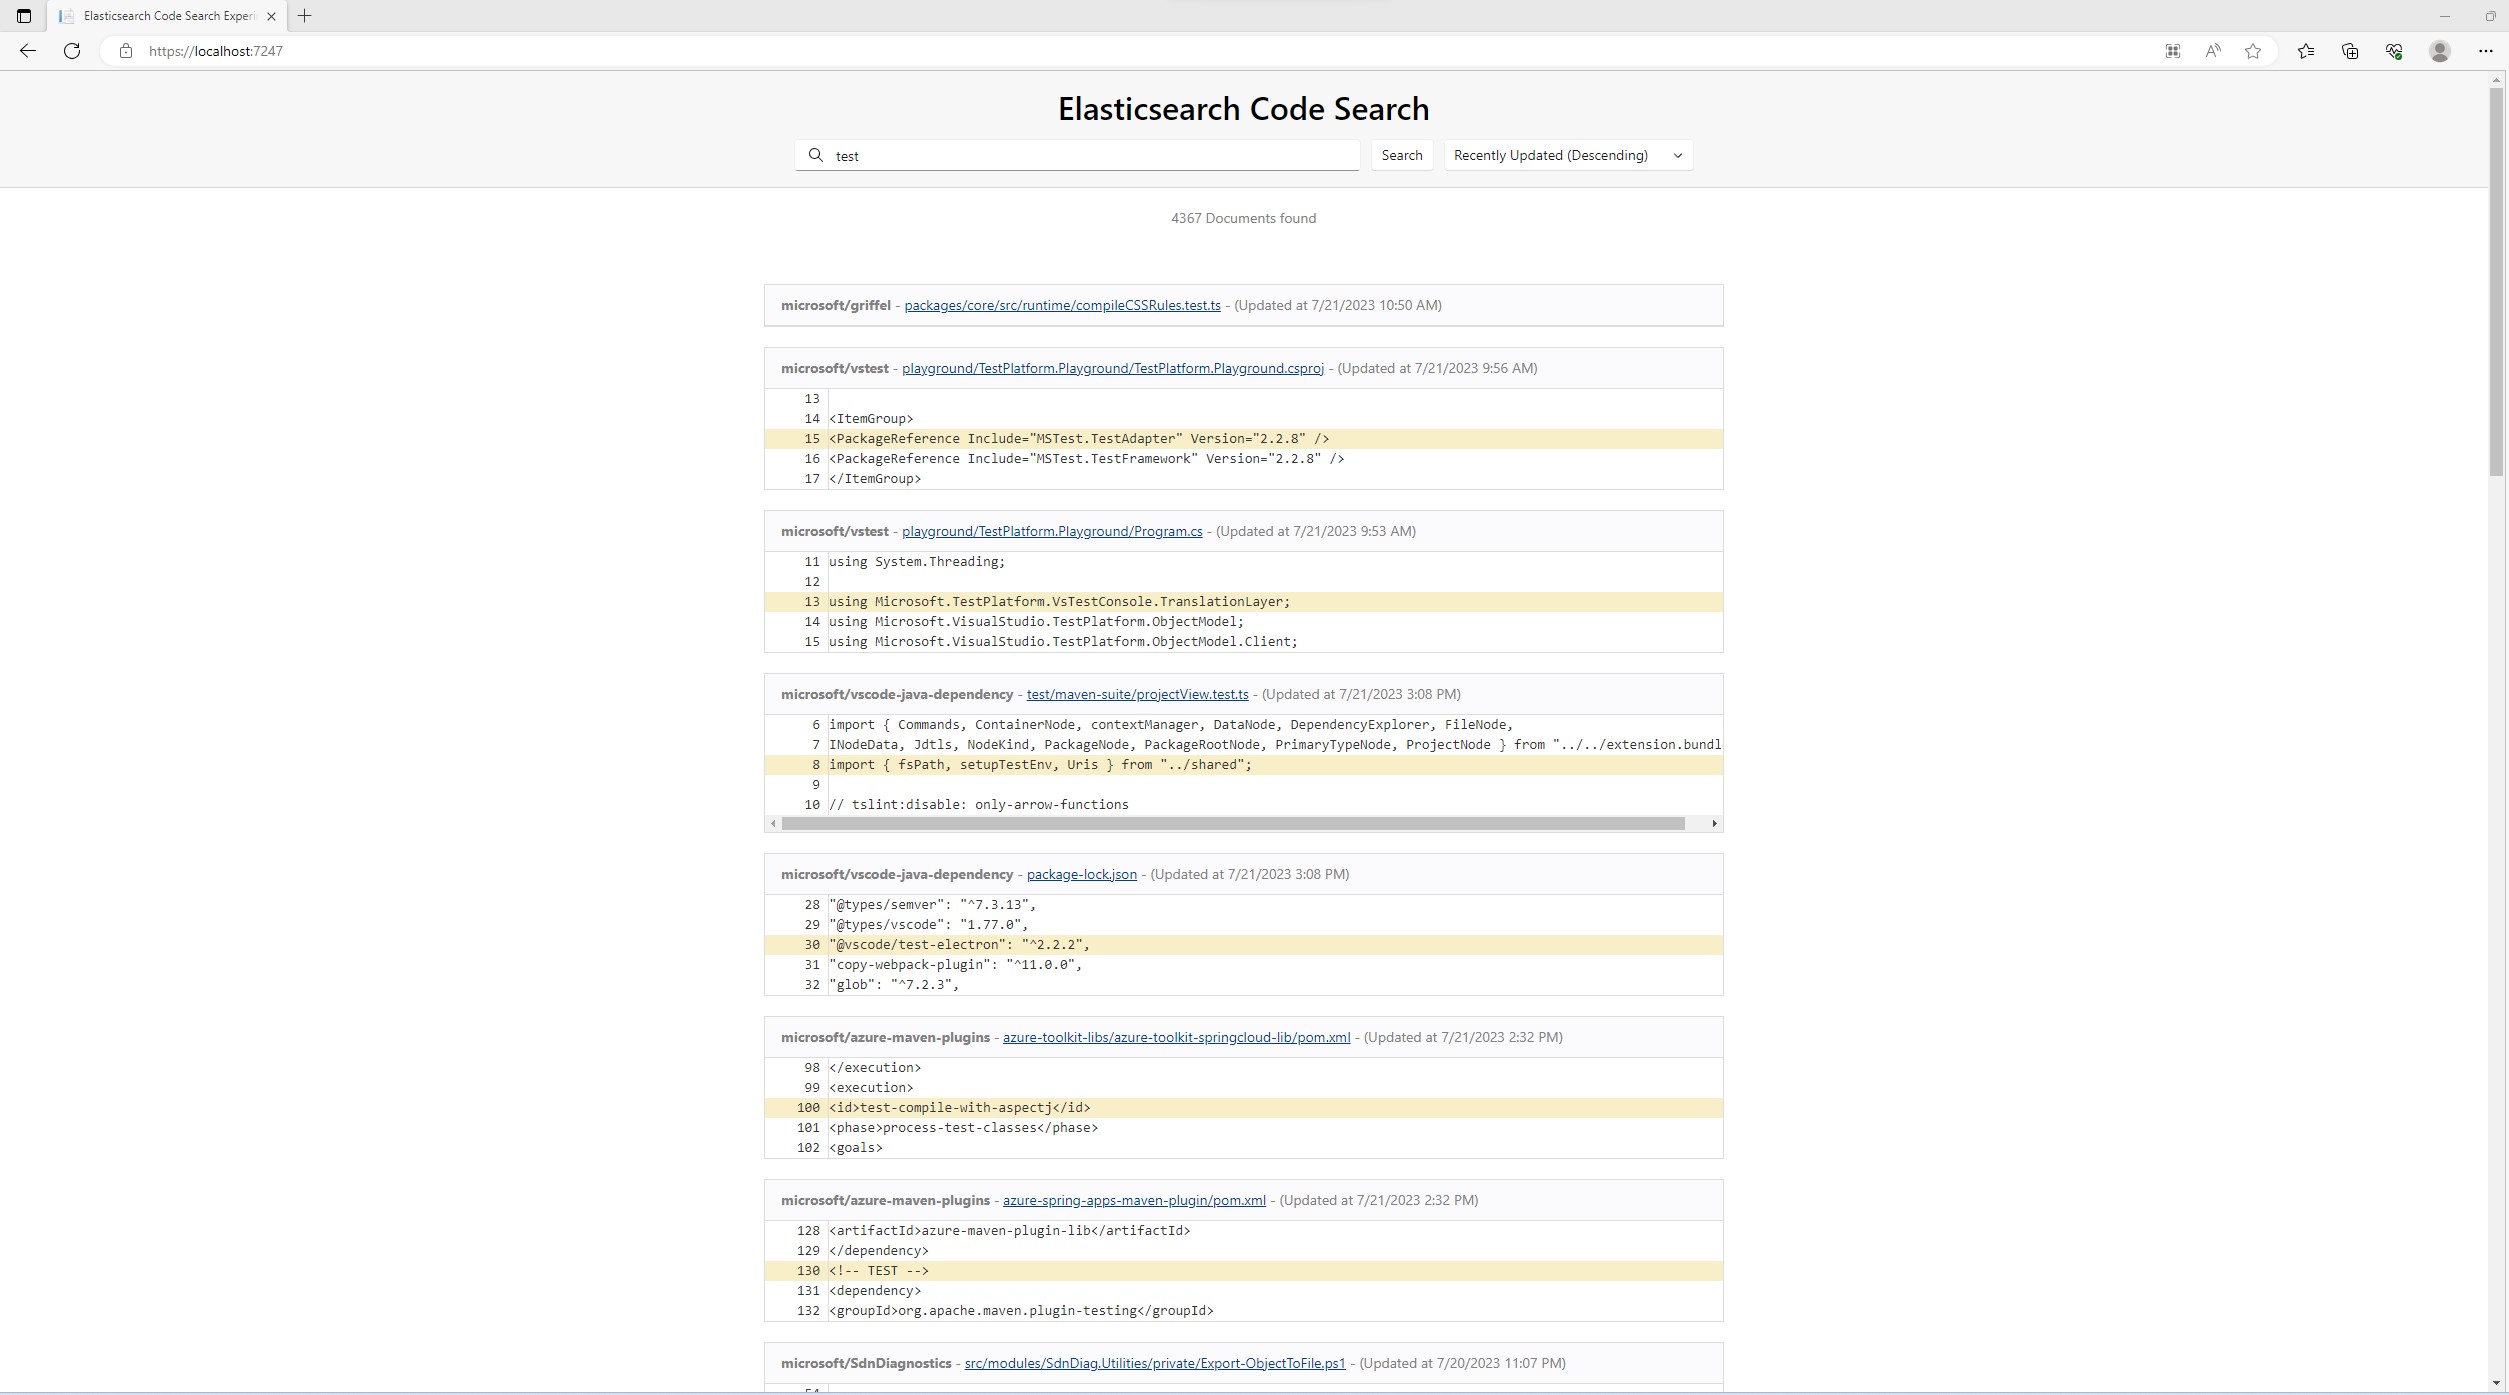 Final Result for the Code Search Engine